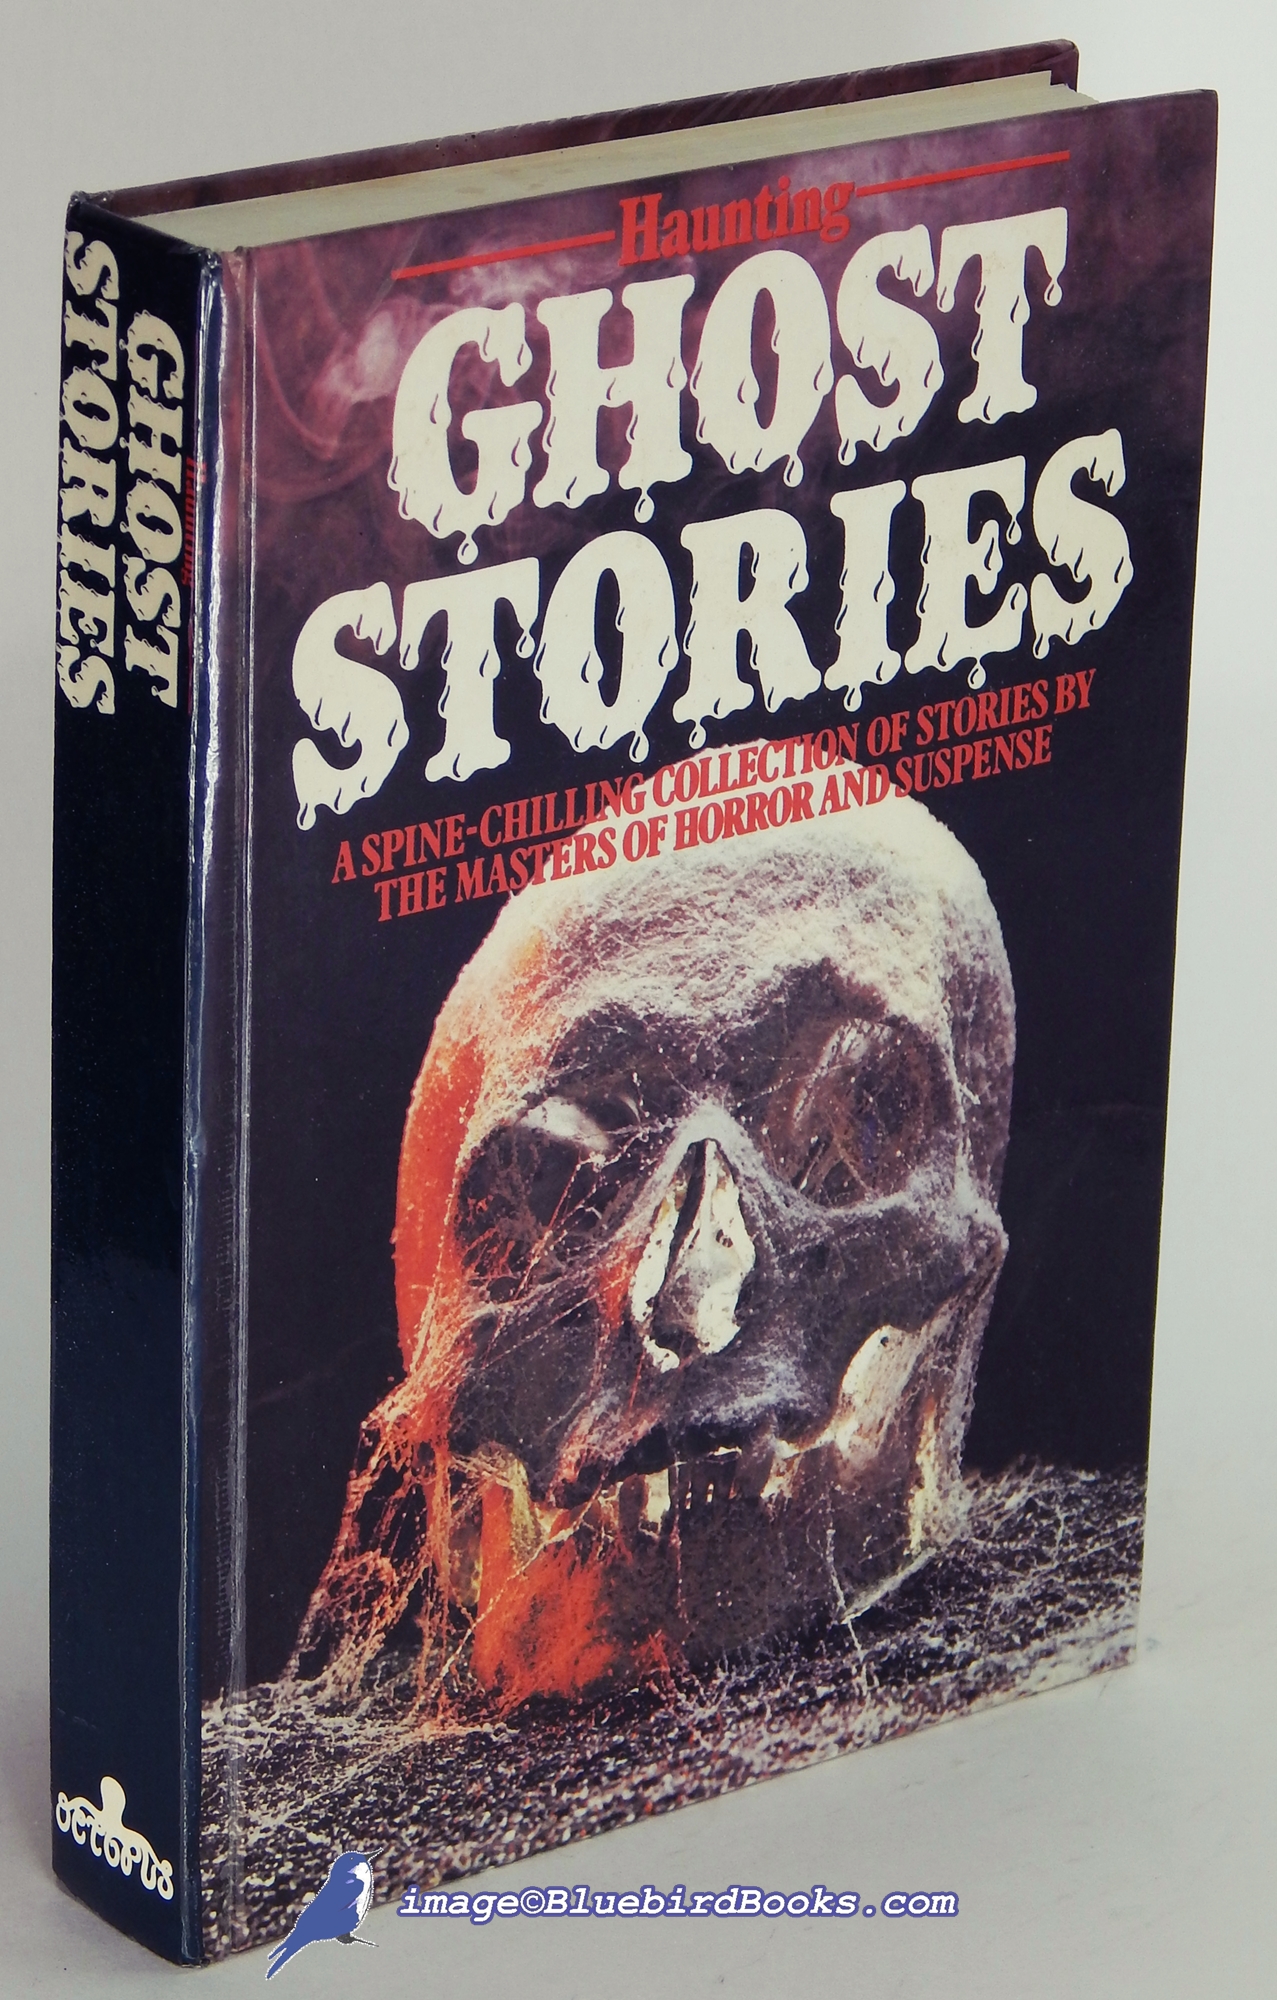 SHINE, DEBORAH (EDITOR); GRAY, REG (ILLUSTRATIONS) - Ghost Stories: A Spine-Chilling Collection of Stories by the Masters of Horror and Suspense